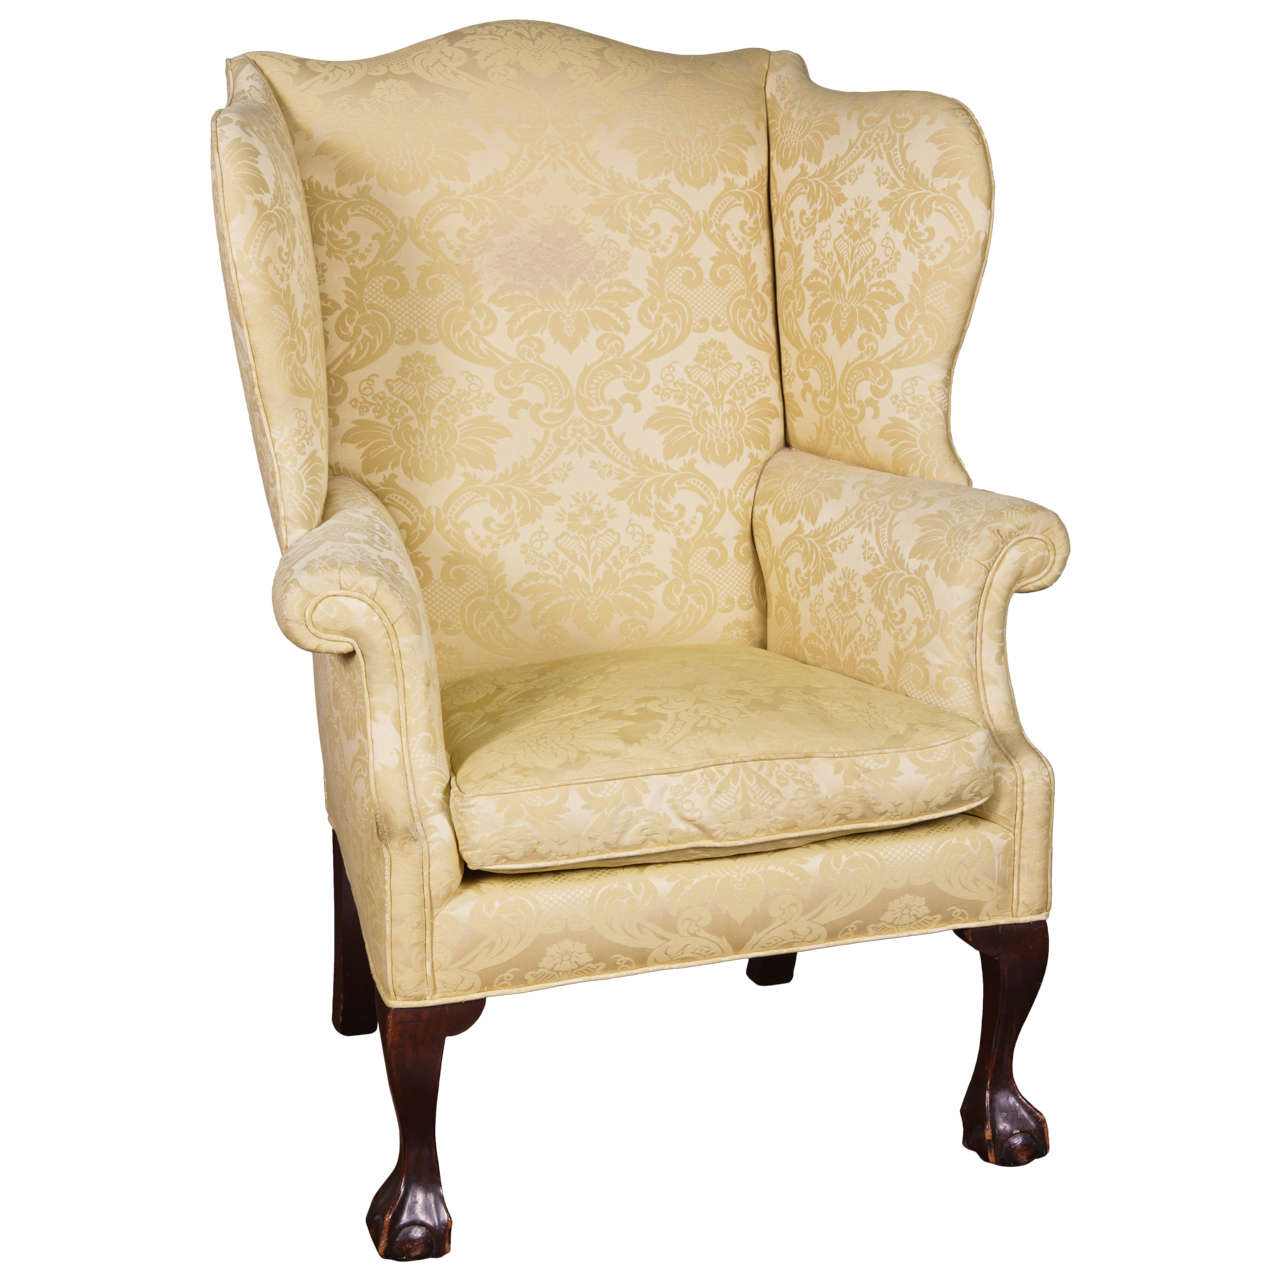 19th Century American Queen Anne Style Wingback Armchair